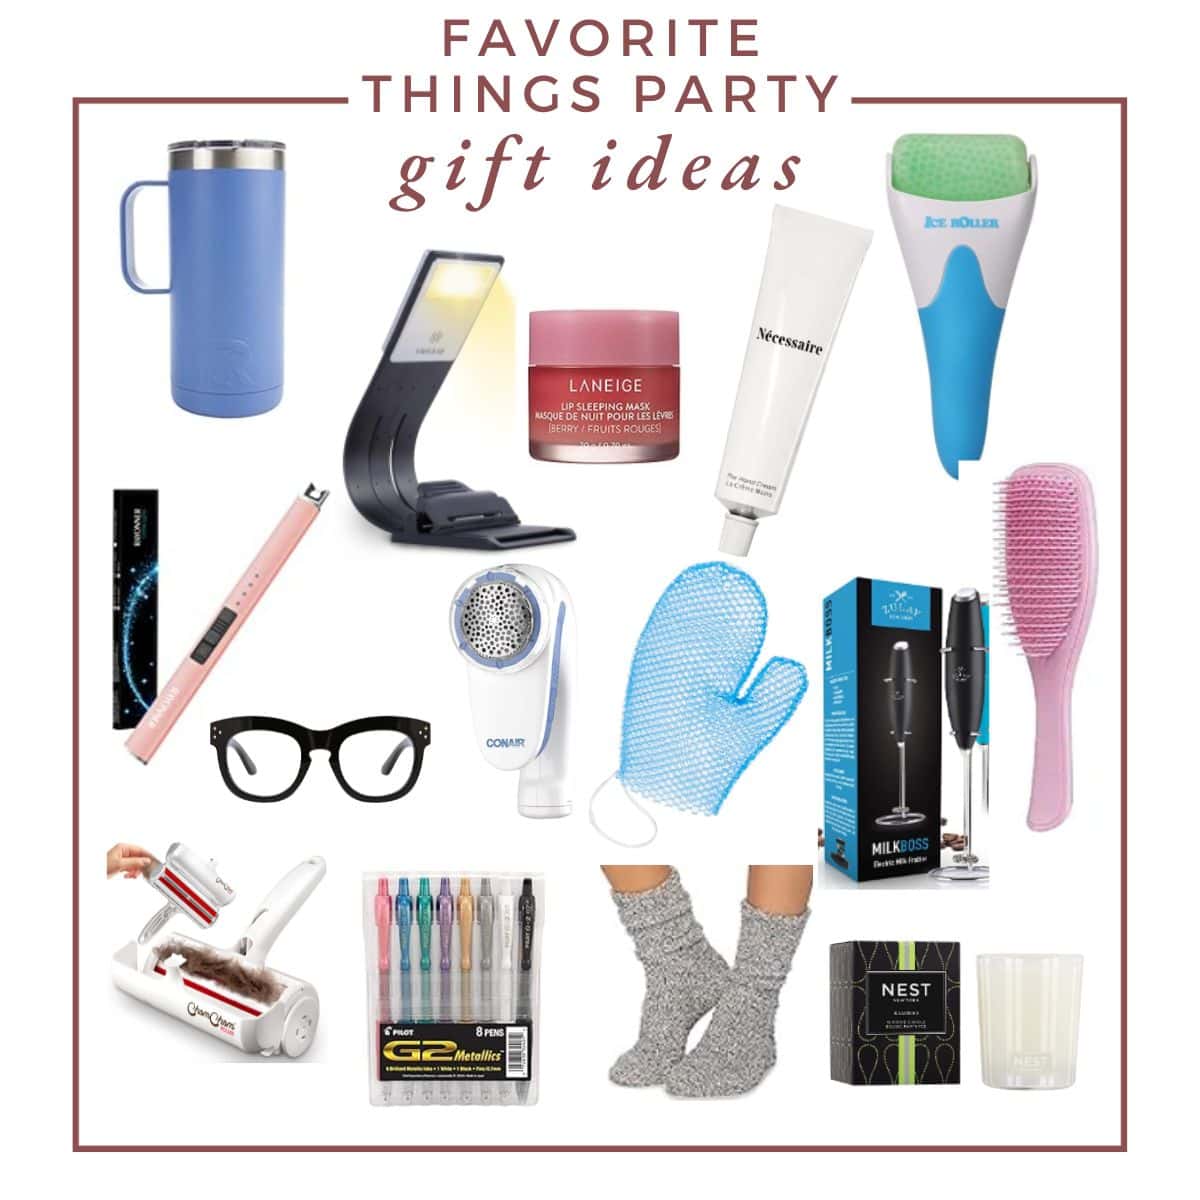 collage of favorite things party gift ideas.